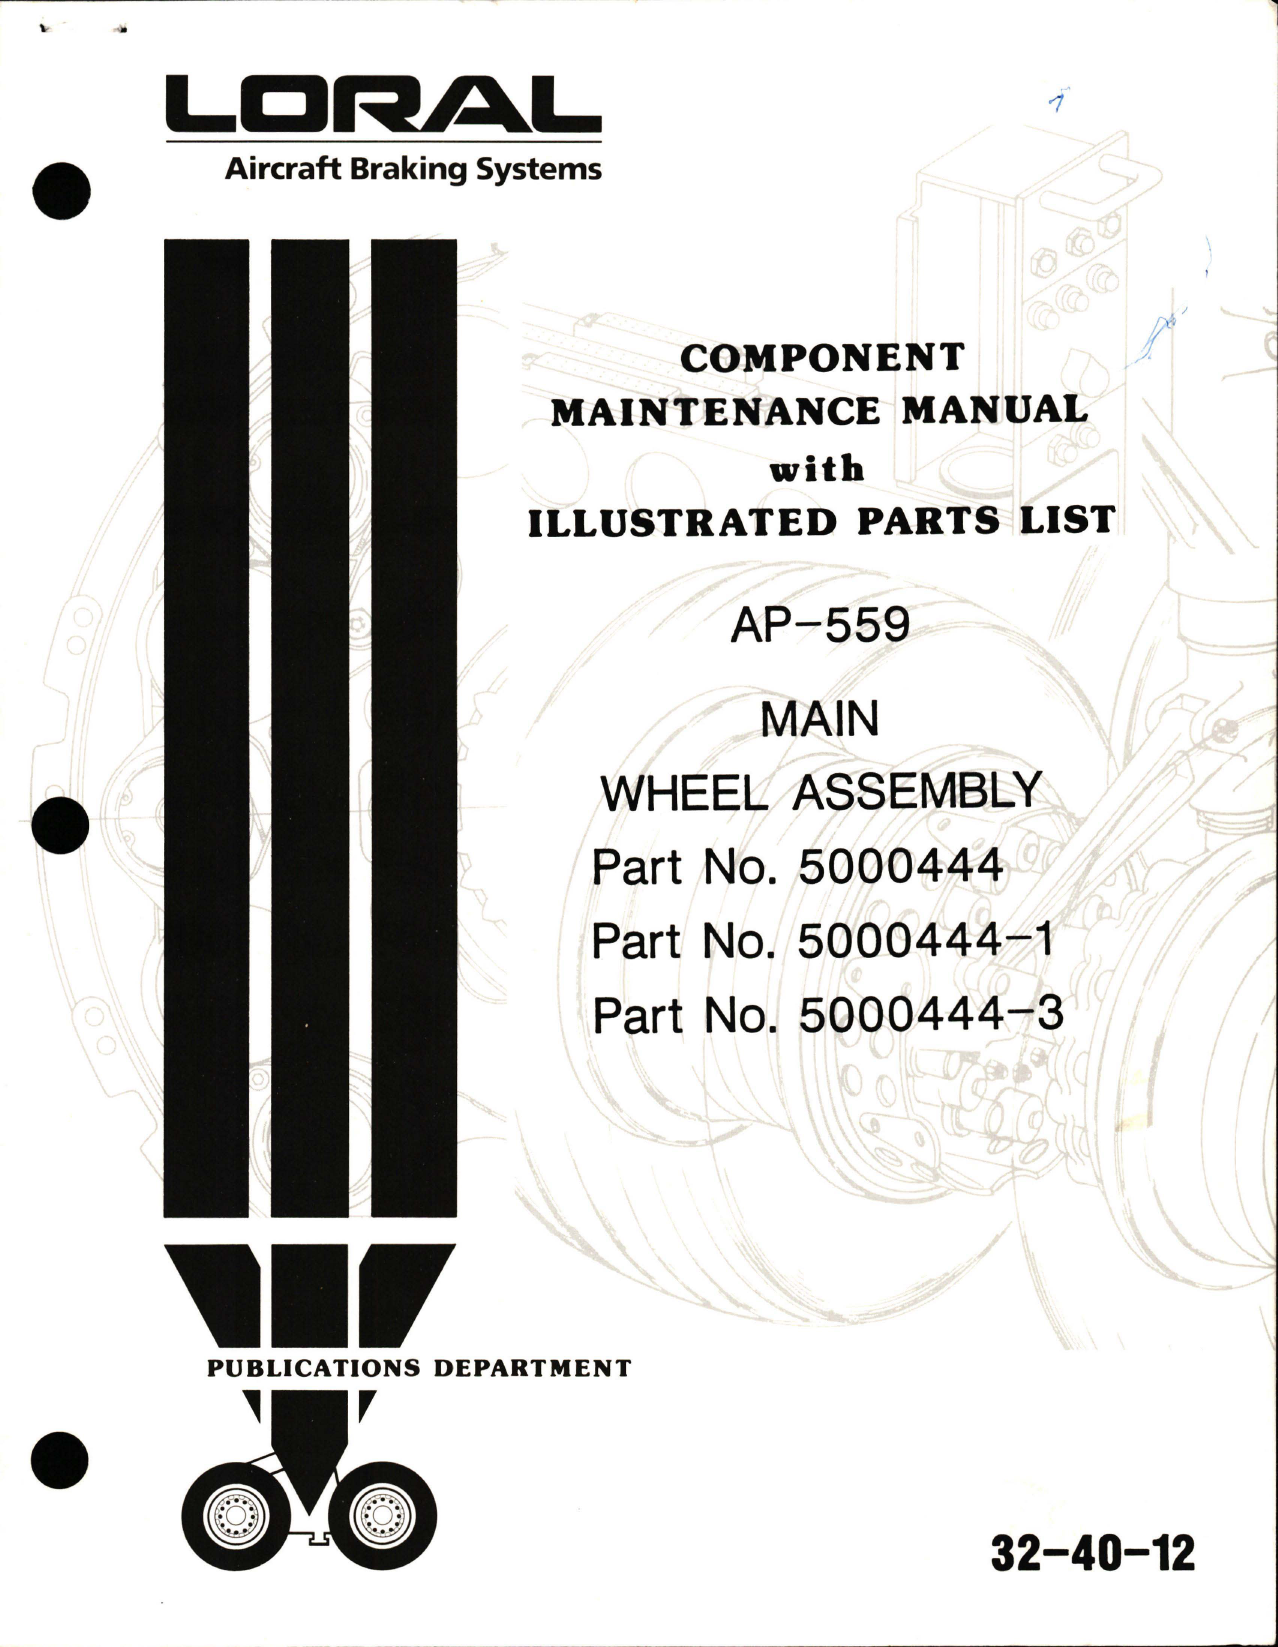 Sample page 1 from AirCorps Library document: Maintenance Manual with Illustrated Parts List for Main Wheel Assembly